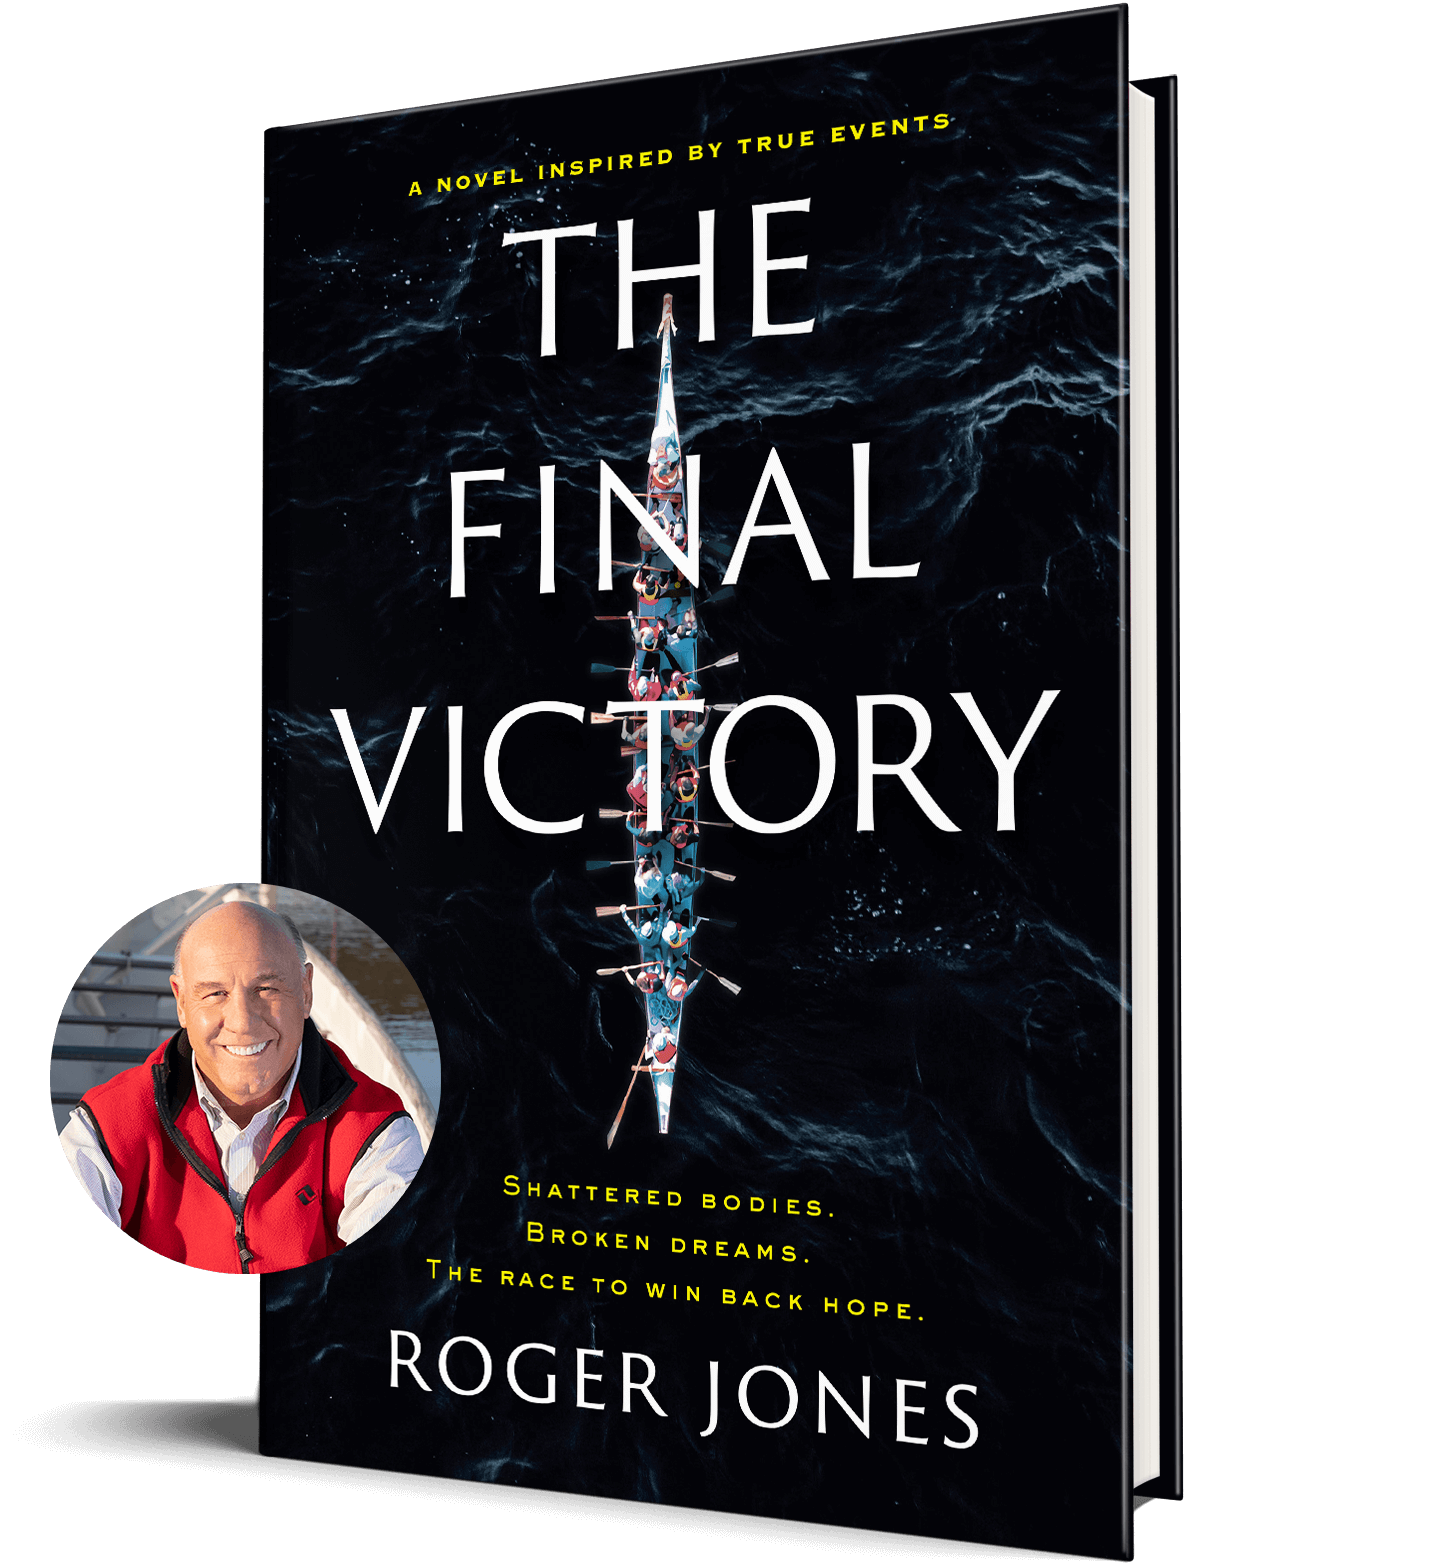 The Final Victory photo of the book